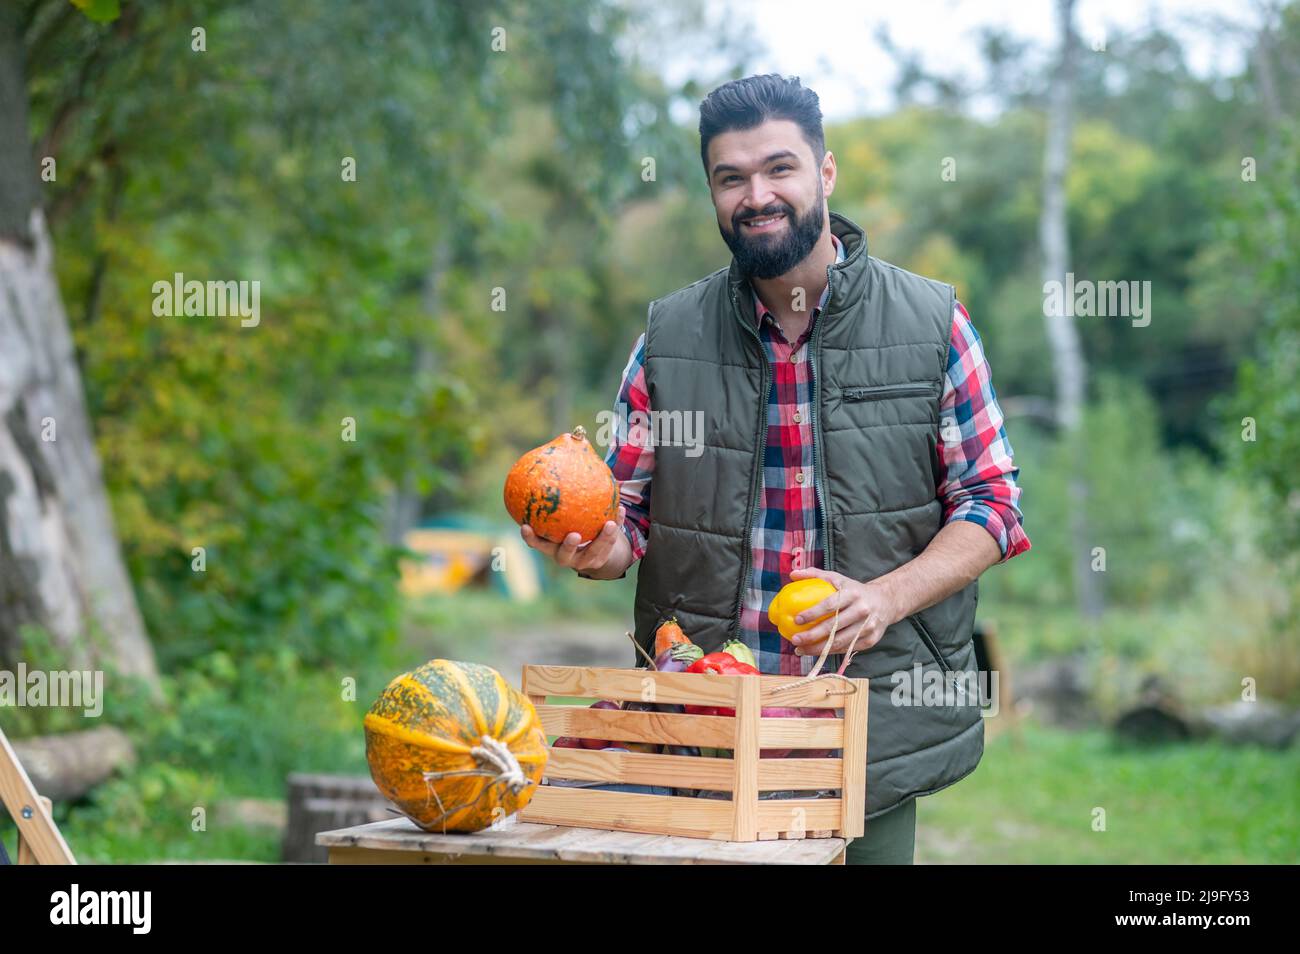 Farmer in plaid shirt sorting vegetables and looking positive Stock Photo